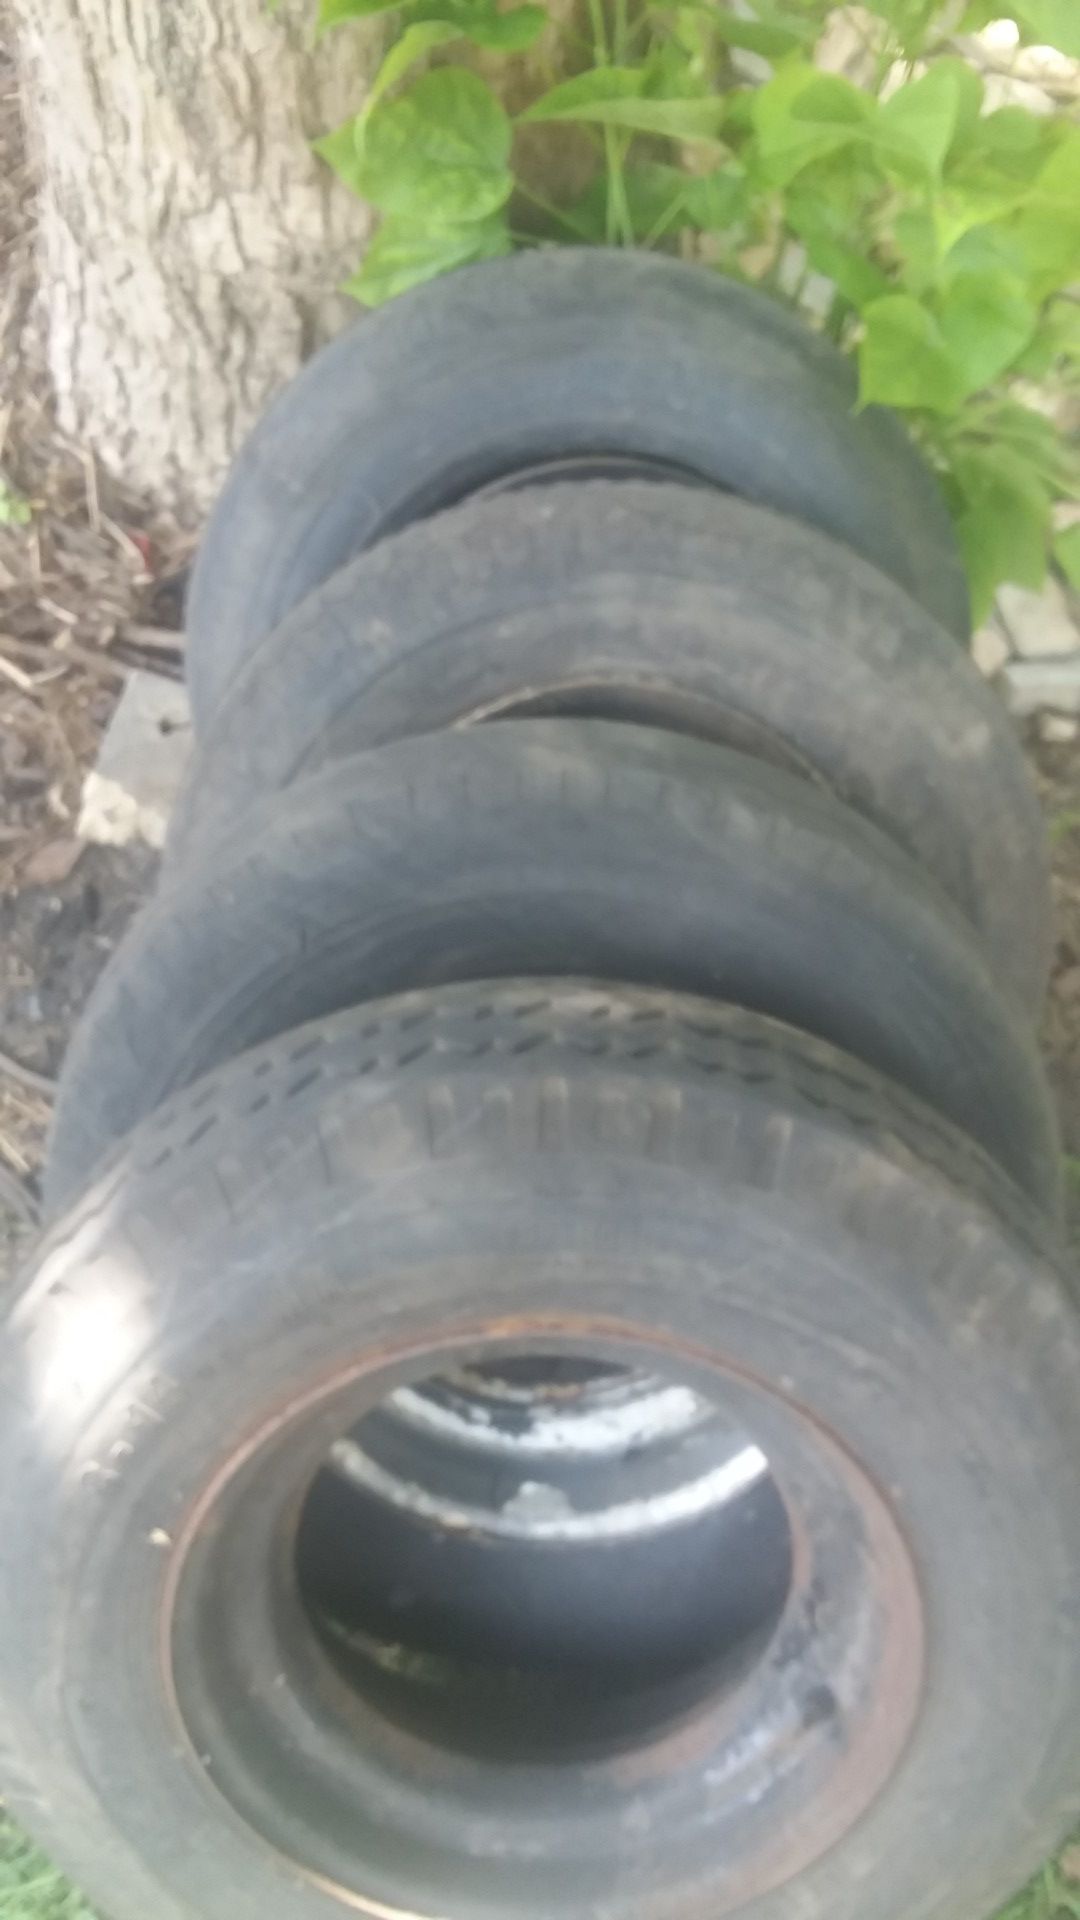 Mobil home axle rim and tires